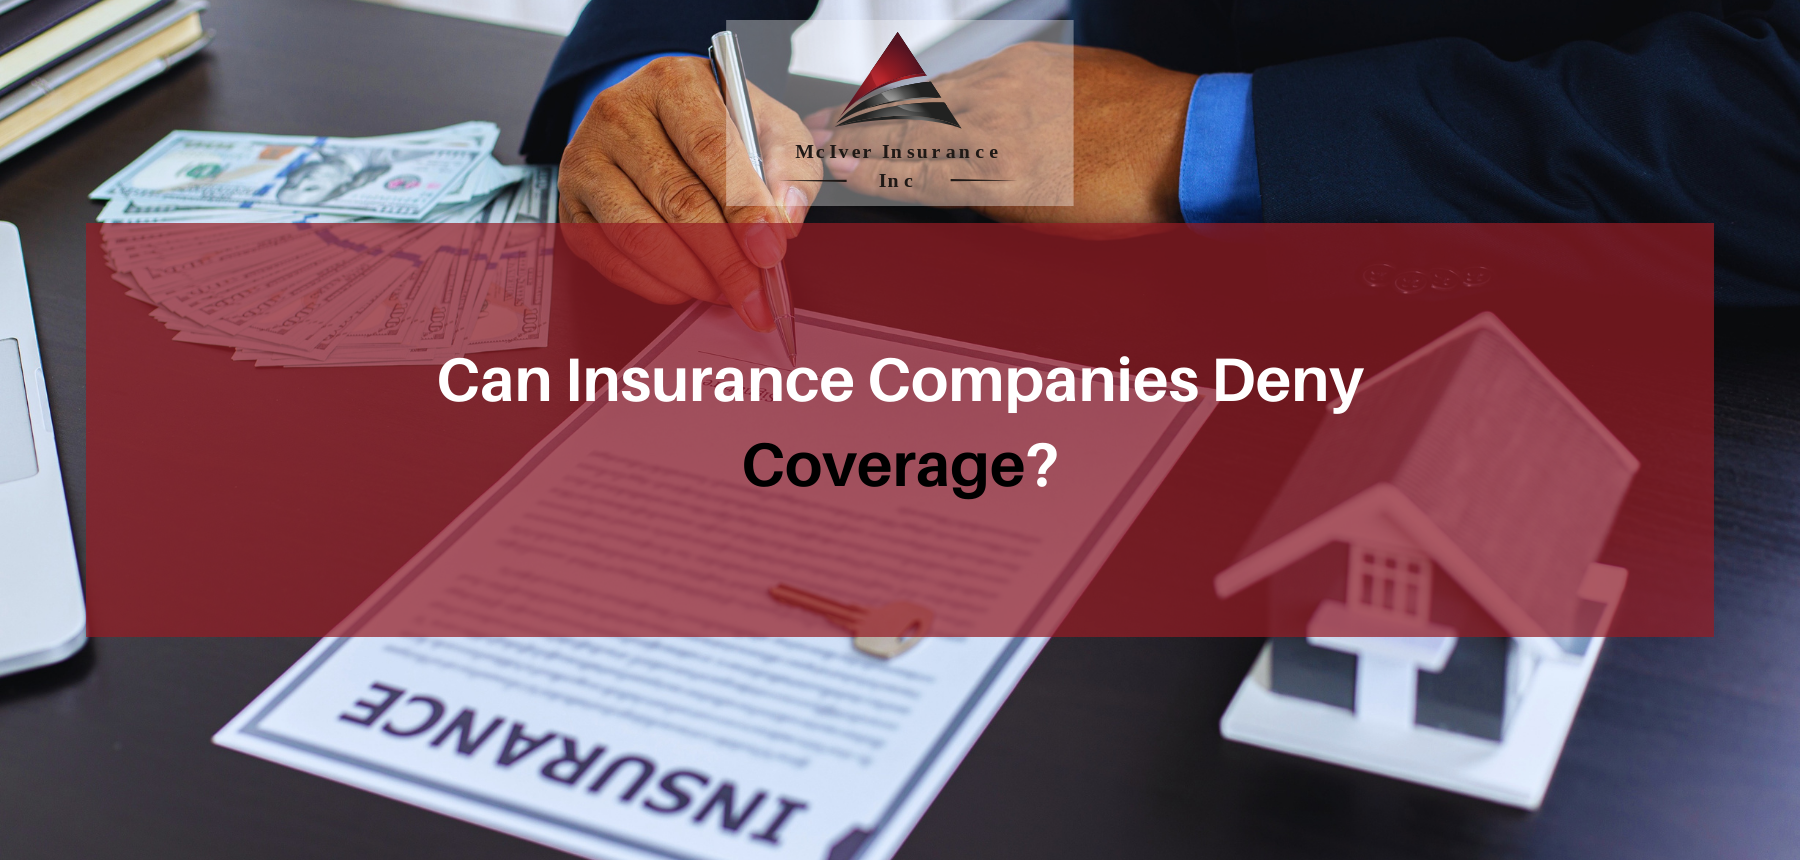 Can Insurance Companies Deny Coverage